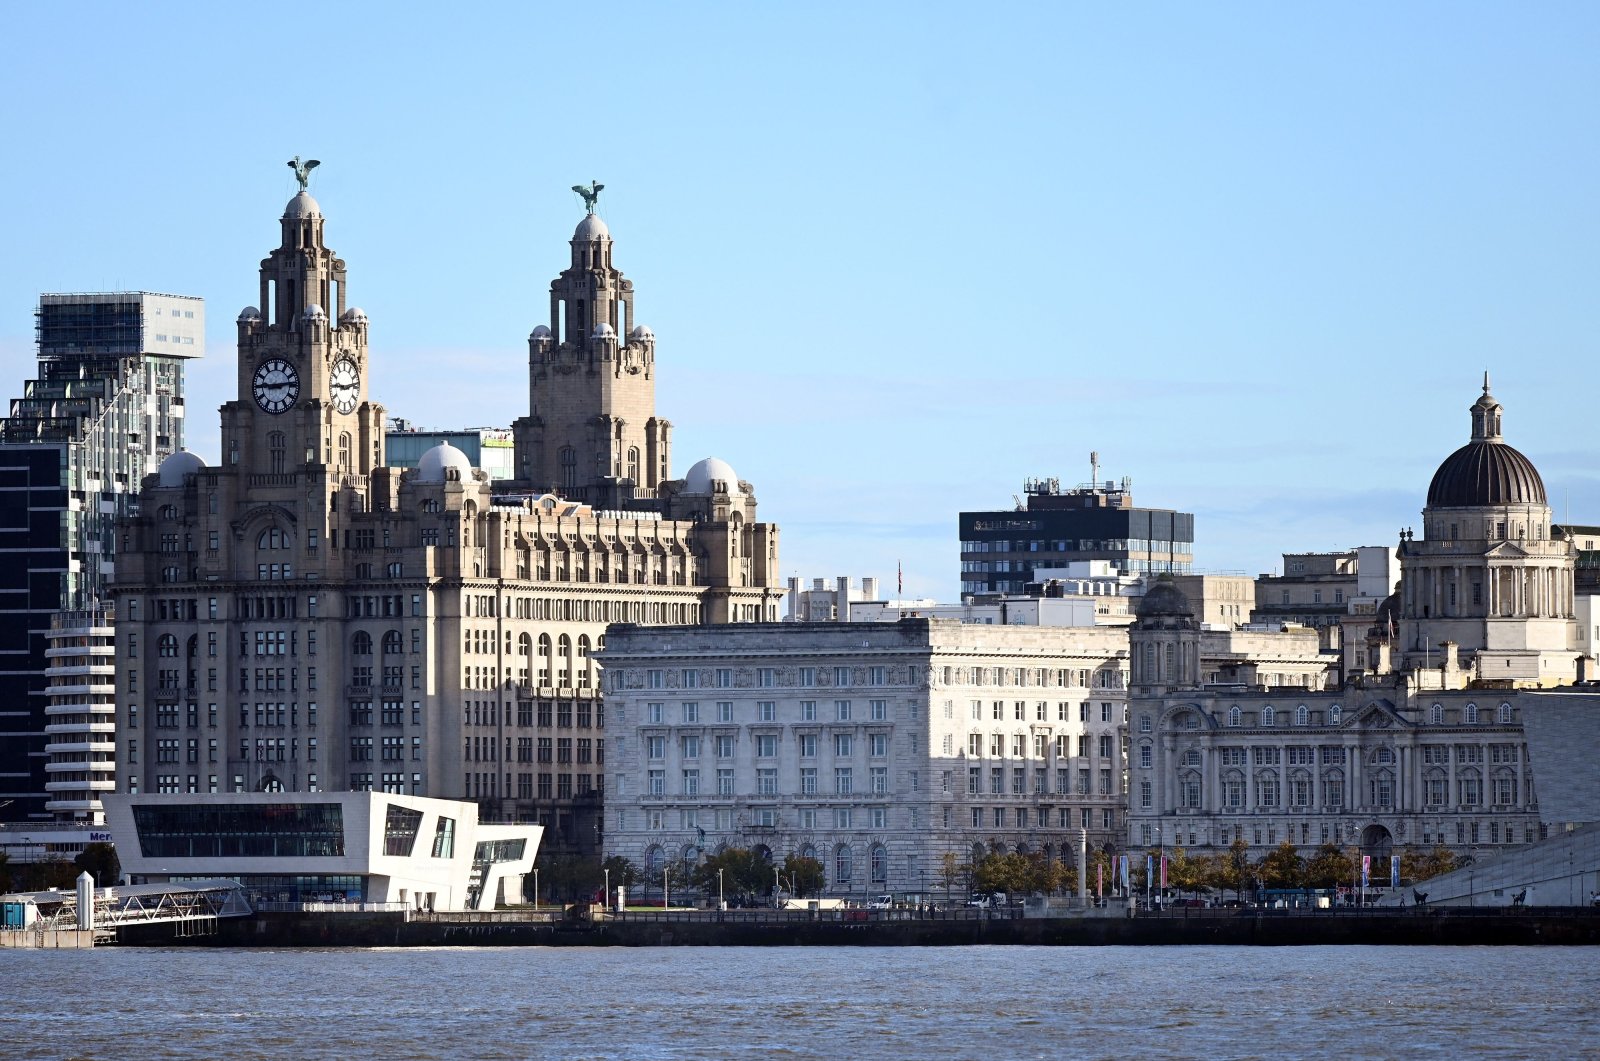 Buildings on Liverpool's waterfront, including the Liver Building, are pictured across the River Mersey, Liverpool, Britain, Oct. 12, 2020. (AFP Photo)